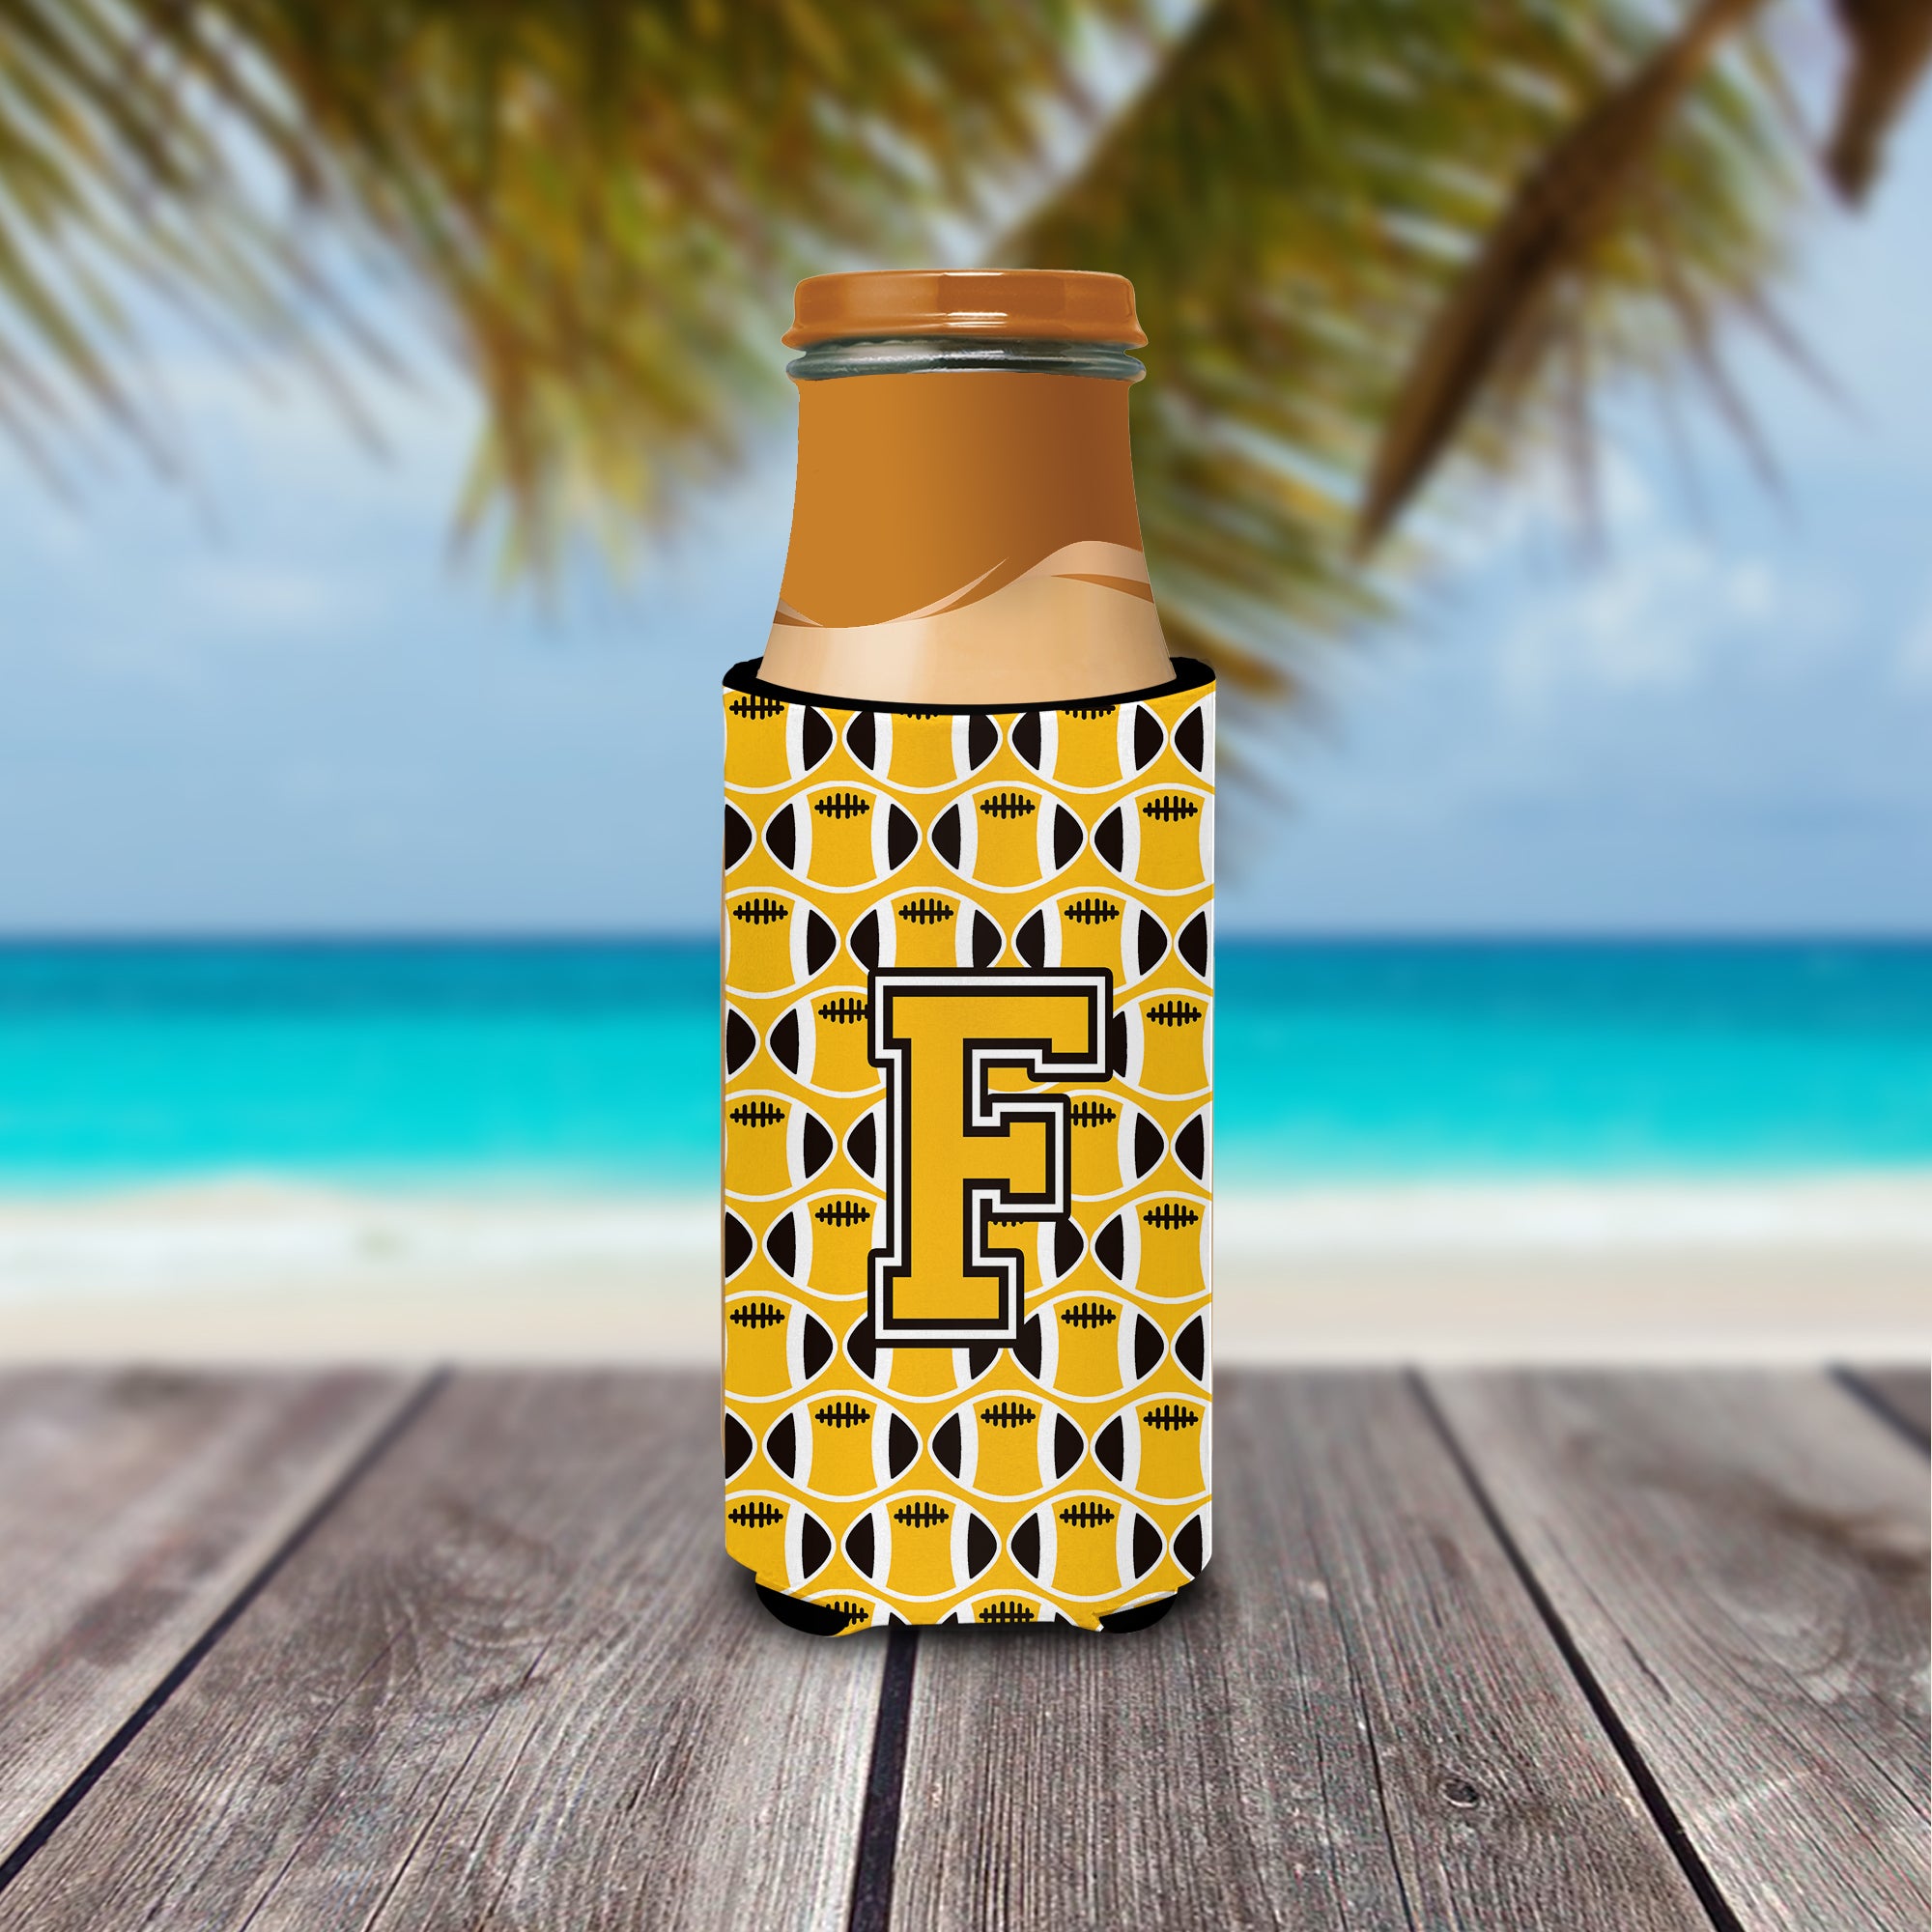 Letter F Football Black, Old Gold and White Ultra Beverage Insulators for slim cans CJ1080-FMUK.